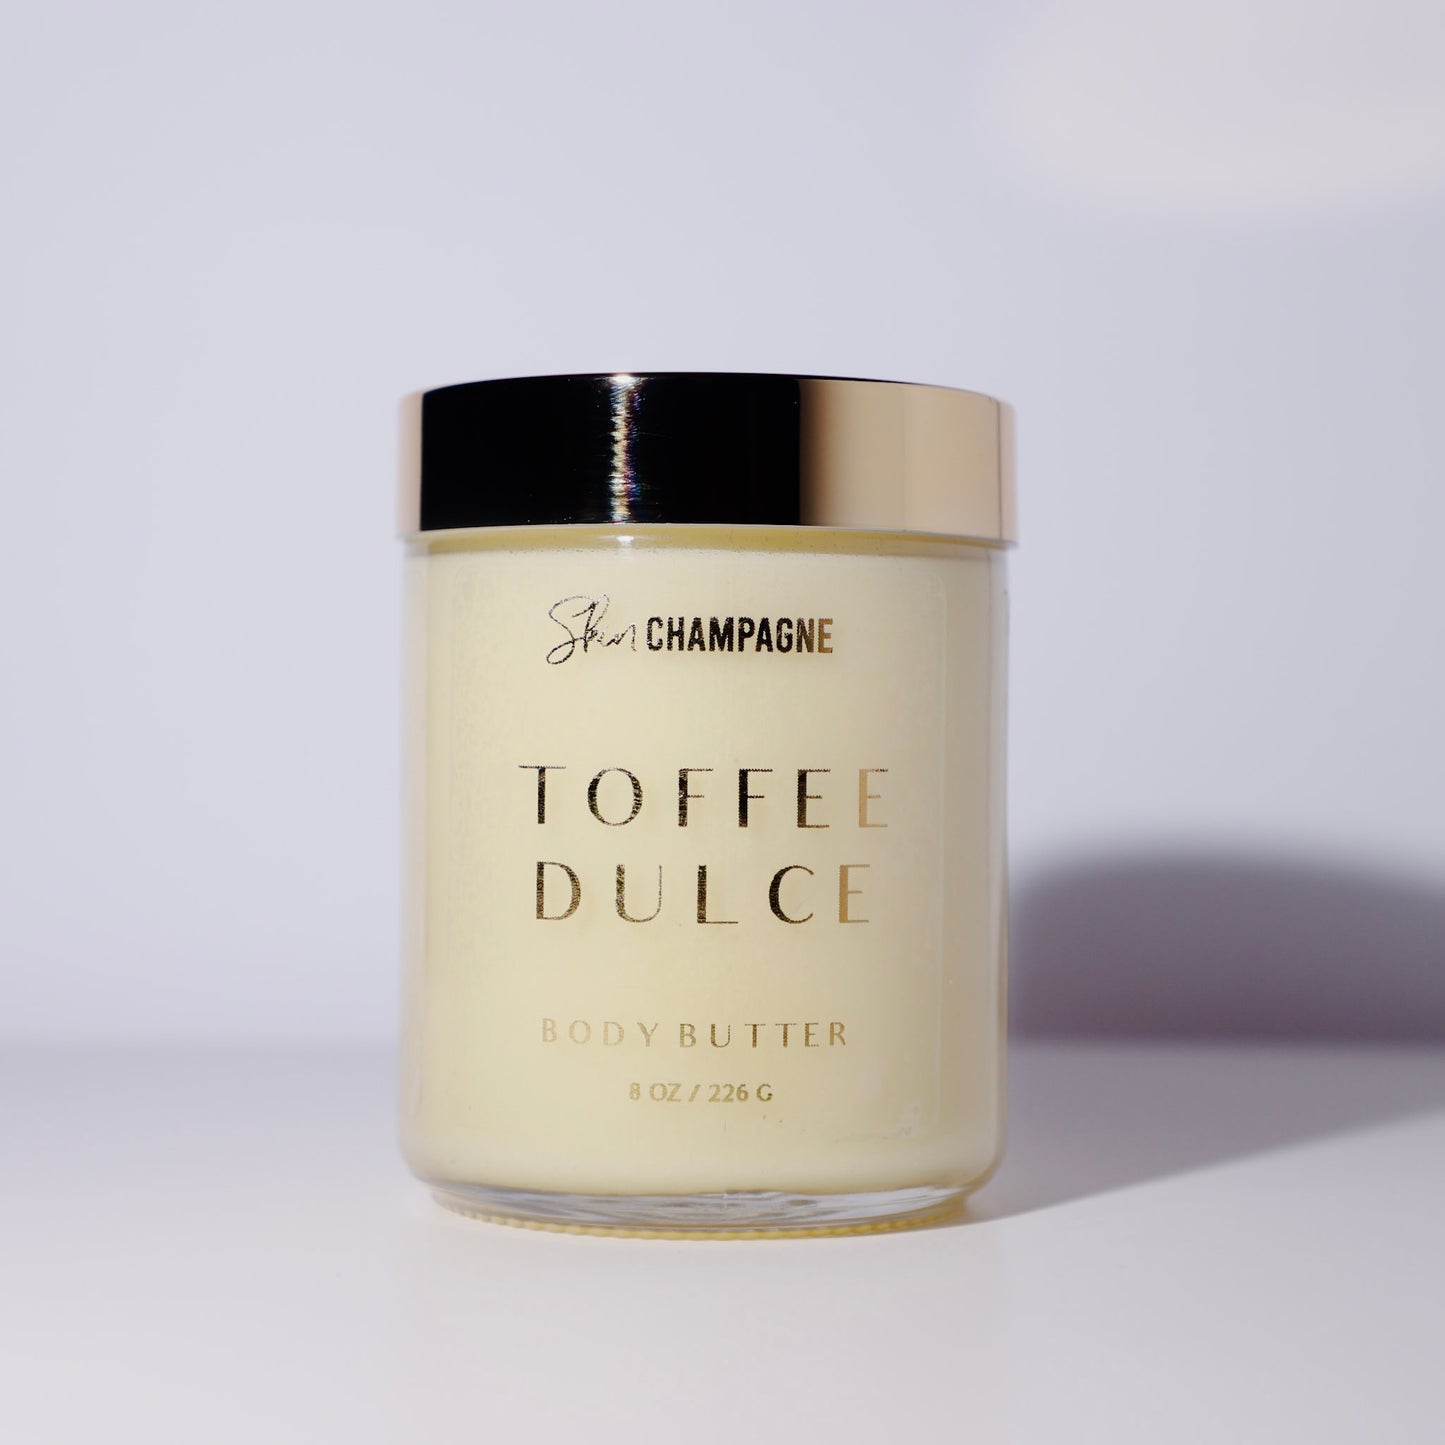 Toffee Dulce Body Butter